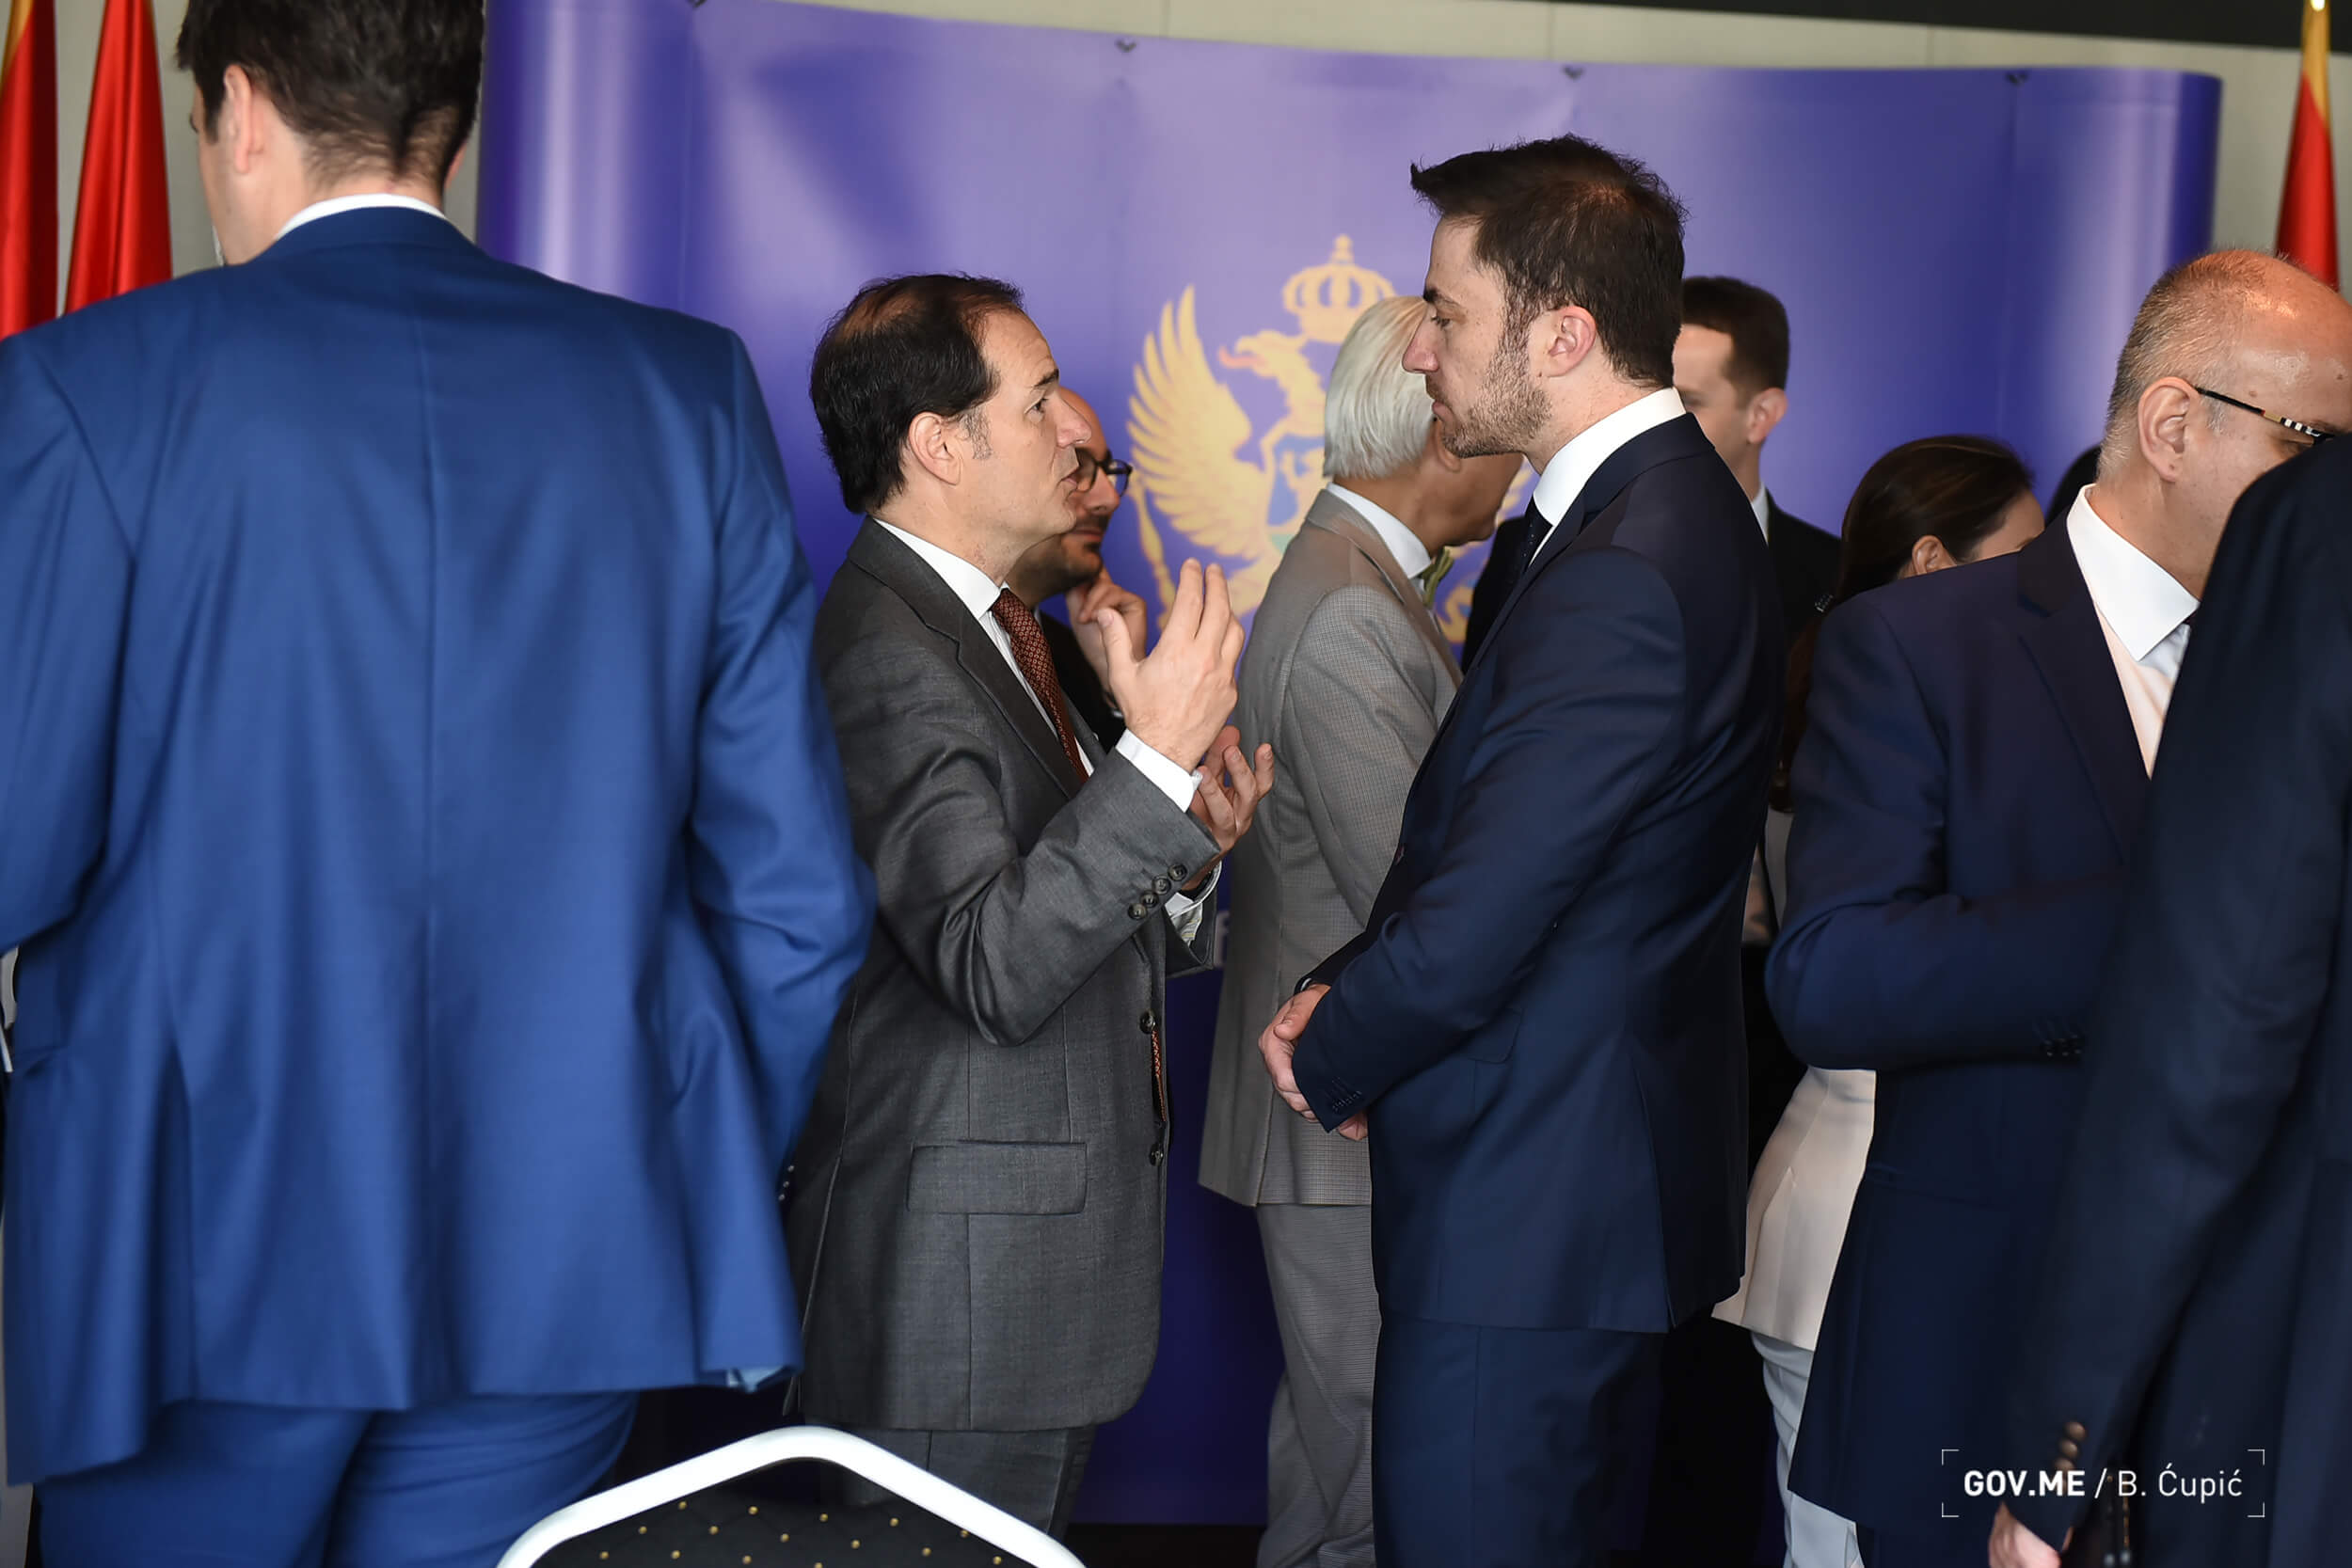 Third Honorary Consuls Conference Held in Podgorica